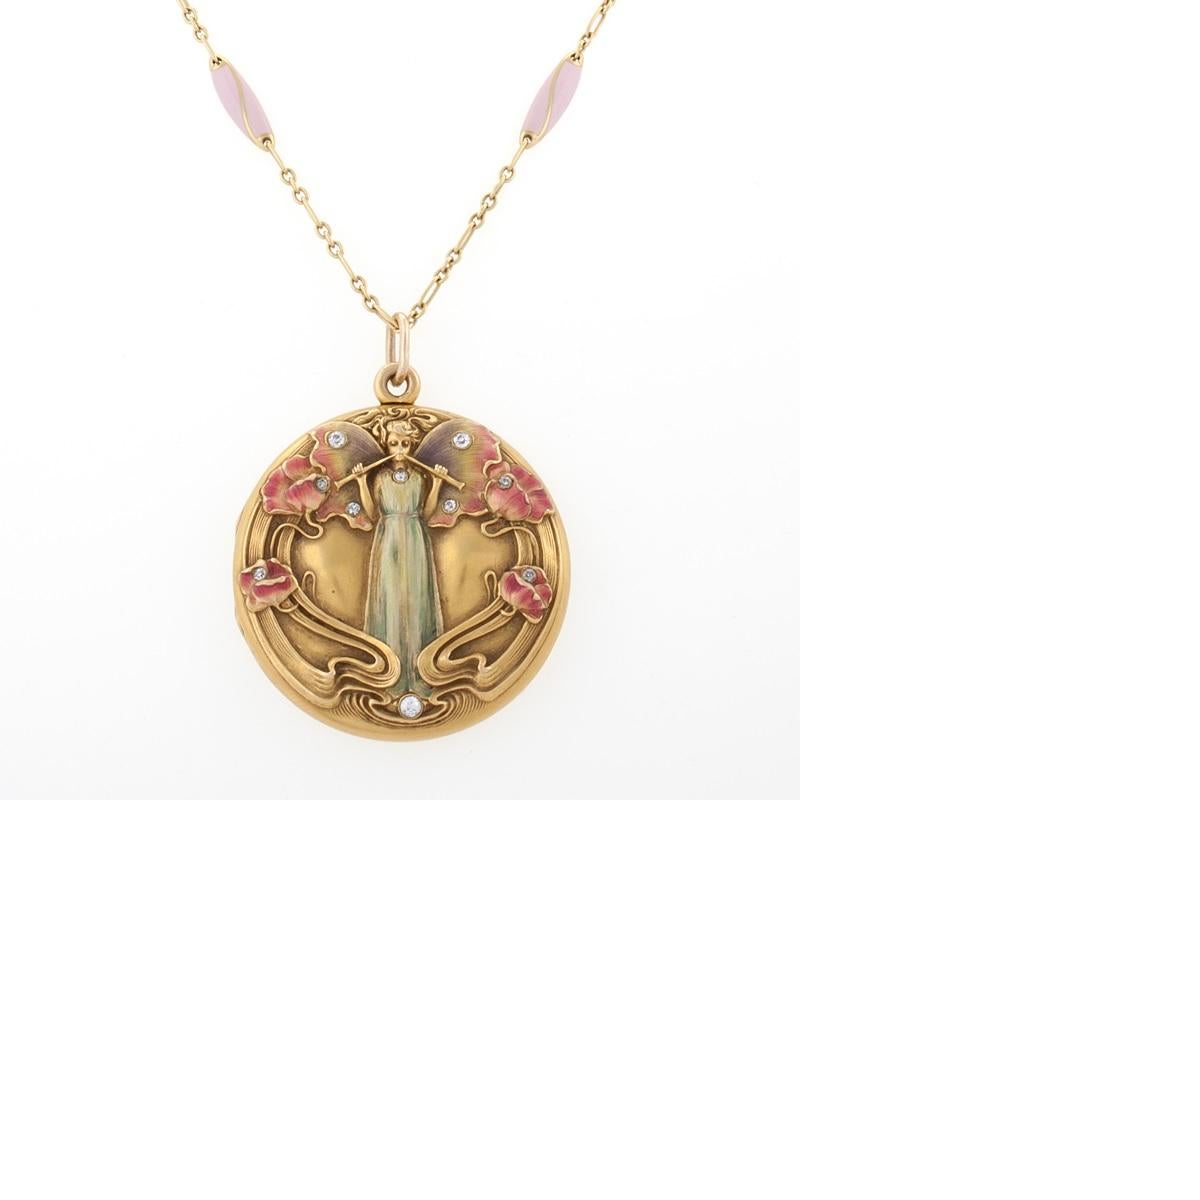 An Art Nouveau 14 karat gold and enamel pendant locket with diamonds. The pendant is decorated with 10 old mine and single-cut diamonds with the approximate total weight of .30 carat.  The relief cover depicts the angel Gabriel blowing his horns.